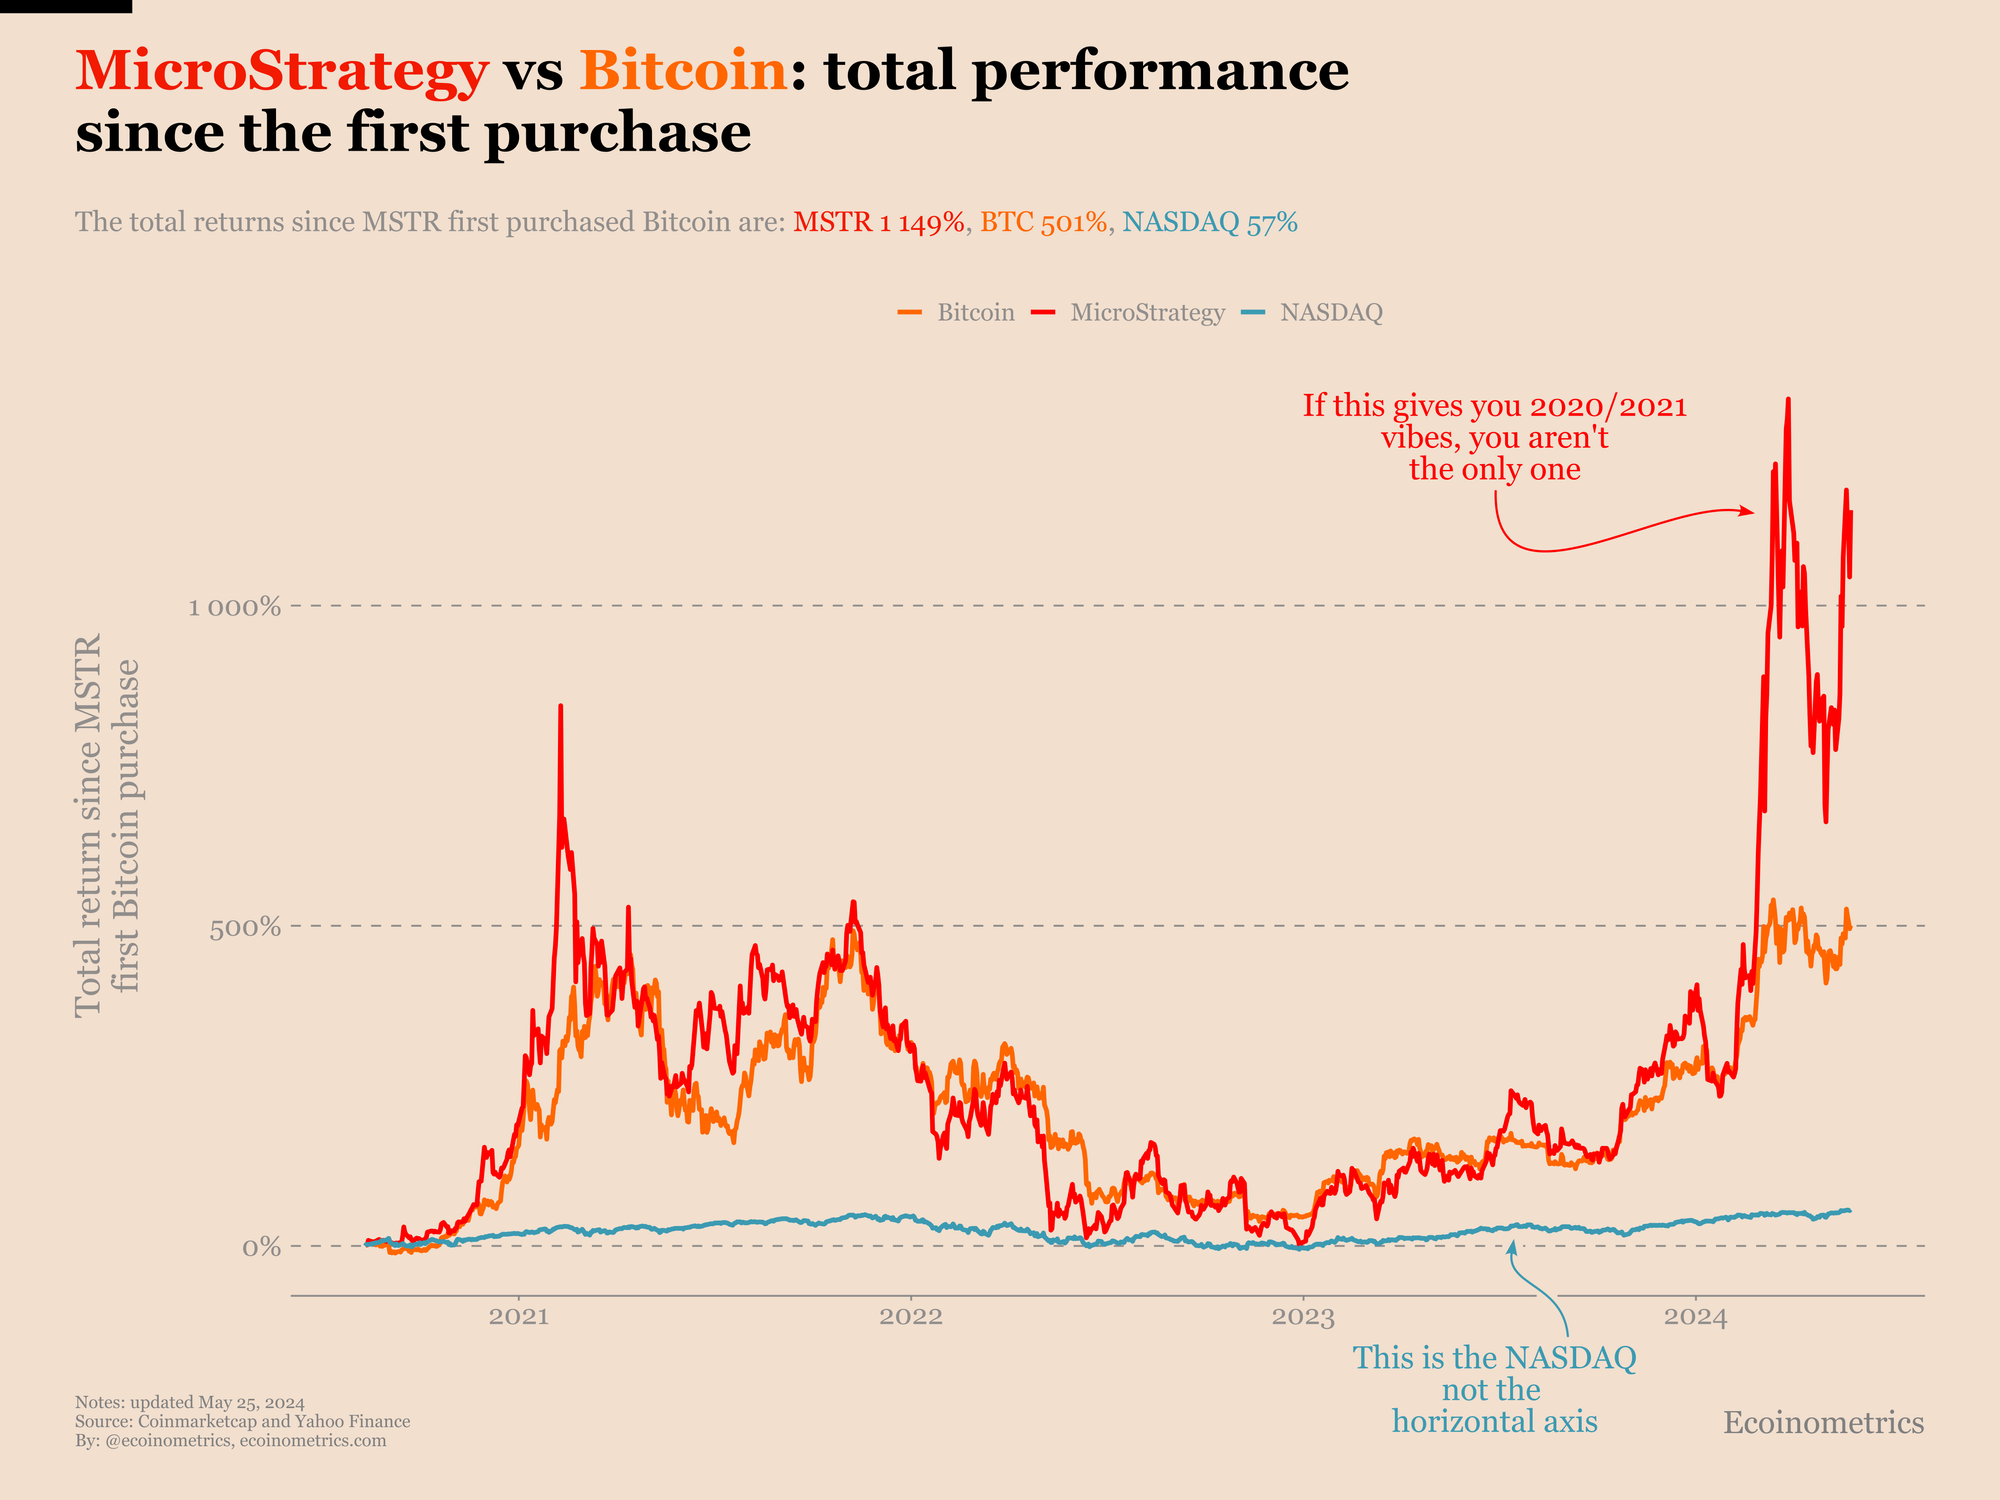 MicroStrategy stock returns compared to Bitcoin and the NASDAQ.